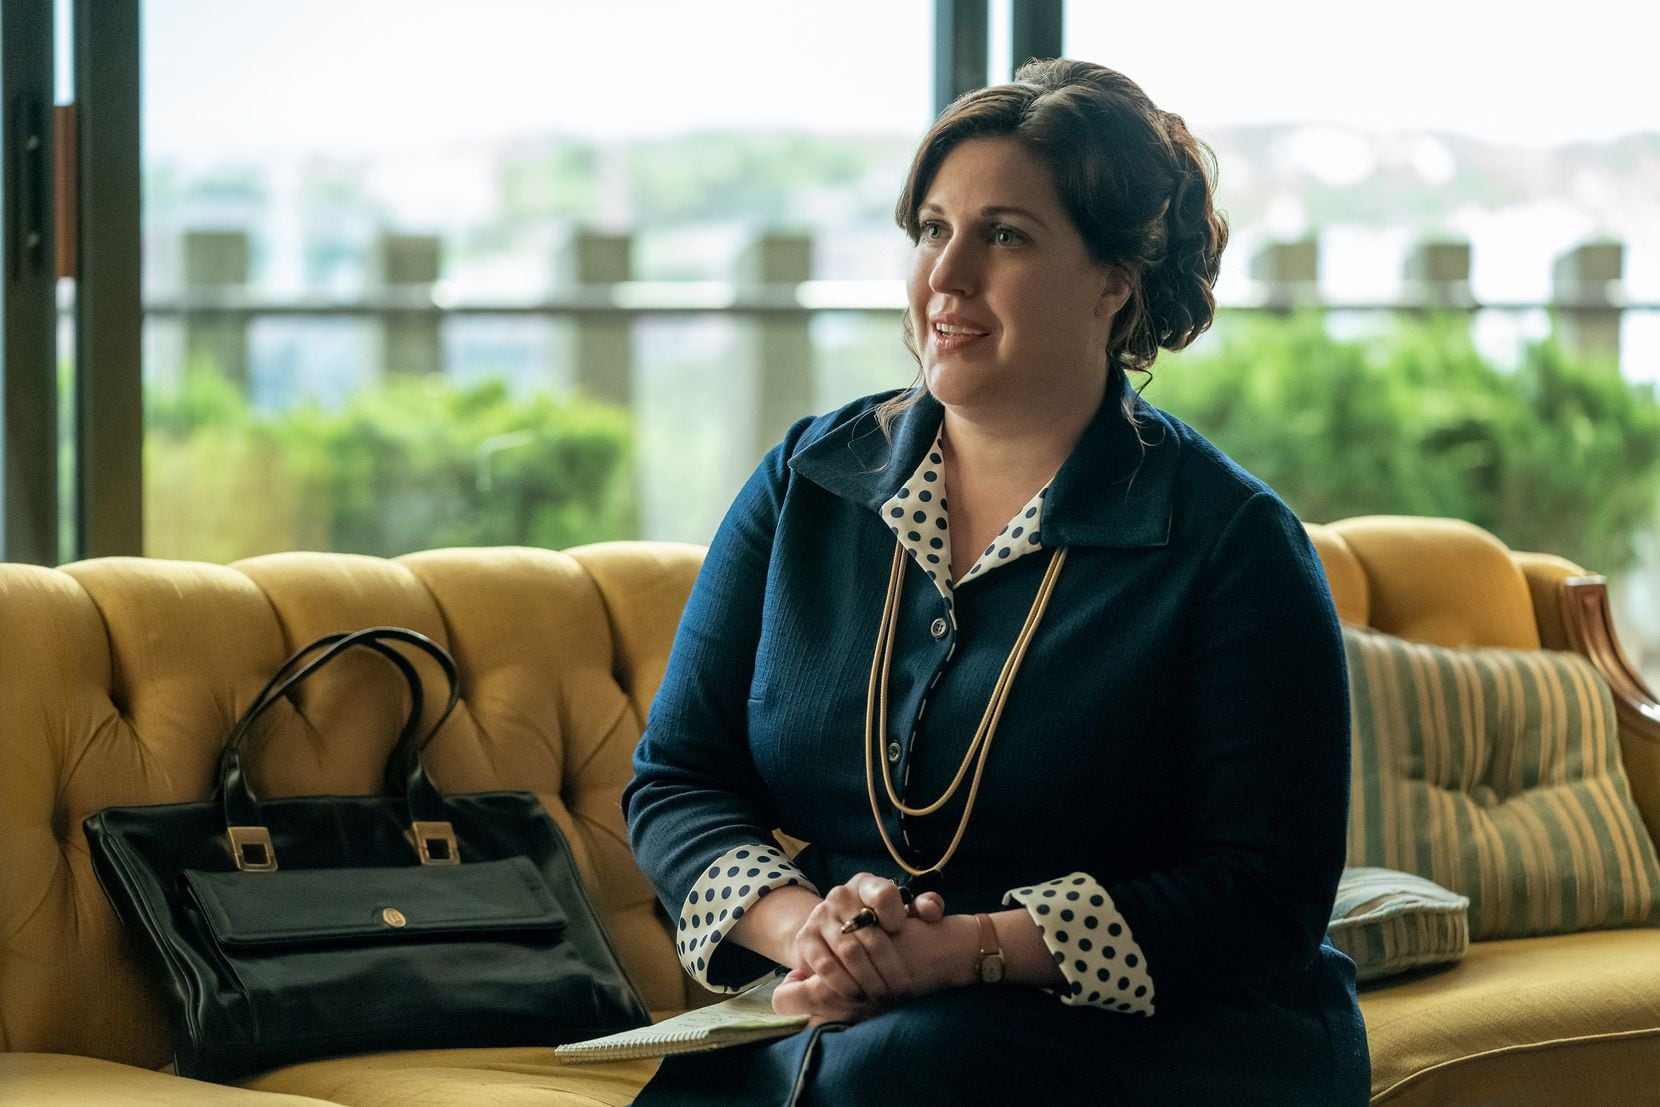 Pictured here is Allison Tolman, an Emmy-nominated actress with strong Dallas roots, who...